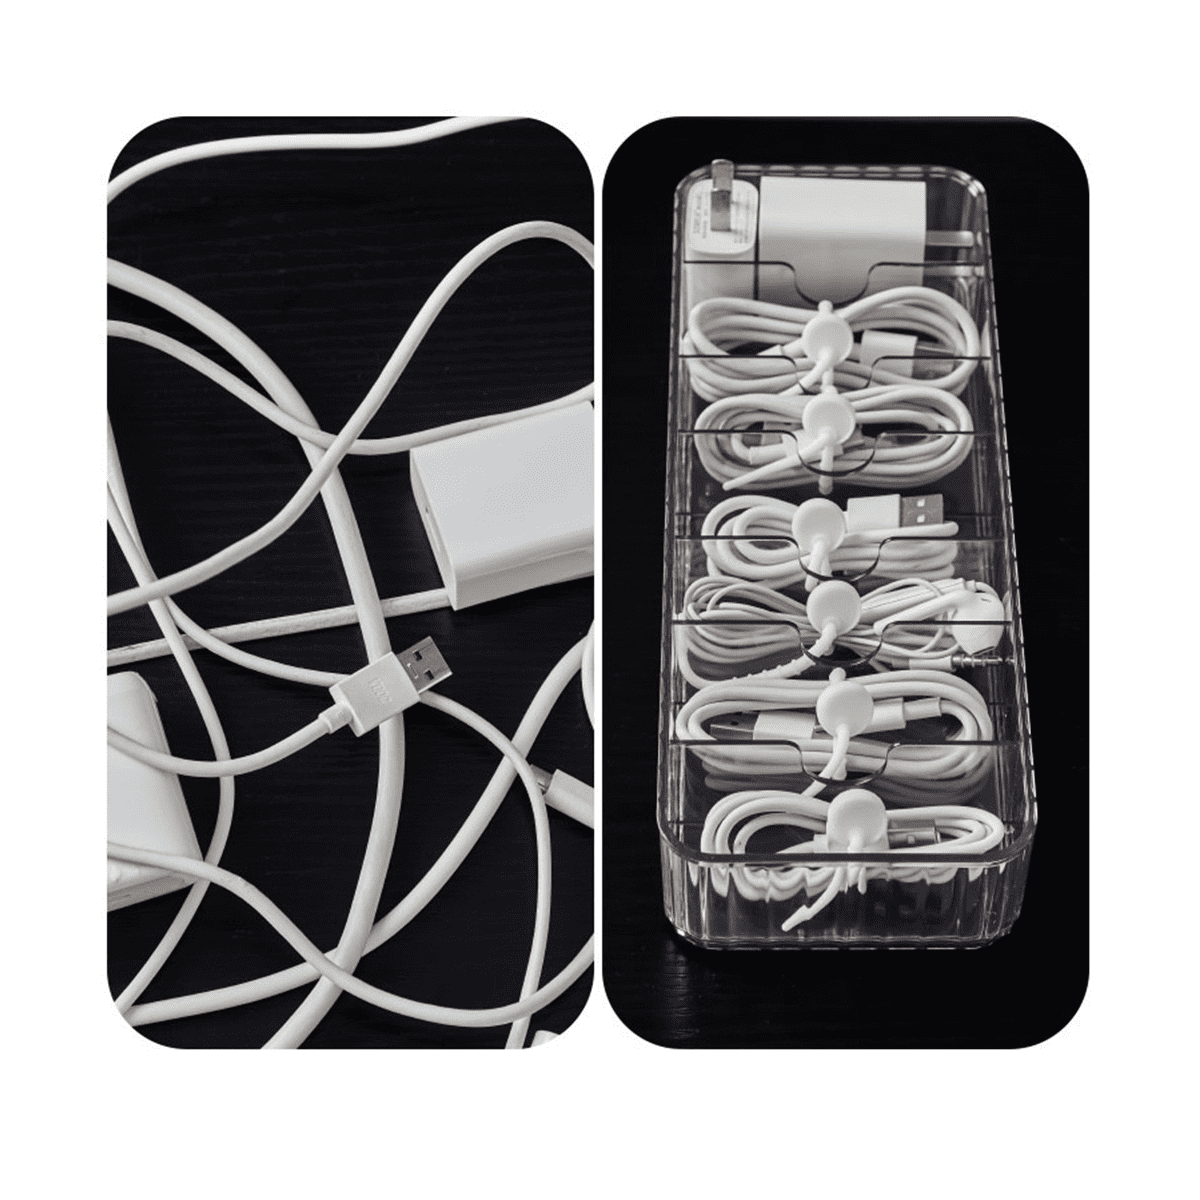 Cable Storage Boxes Organizers 2 Pack,Cord Charger Storage Organizer Box  Case with 20pcs Cable Ties,Stackable,Clear